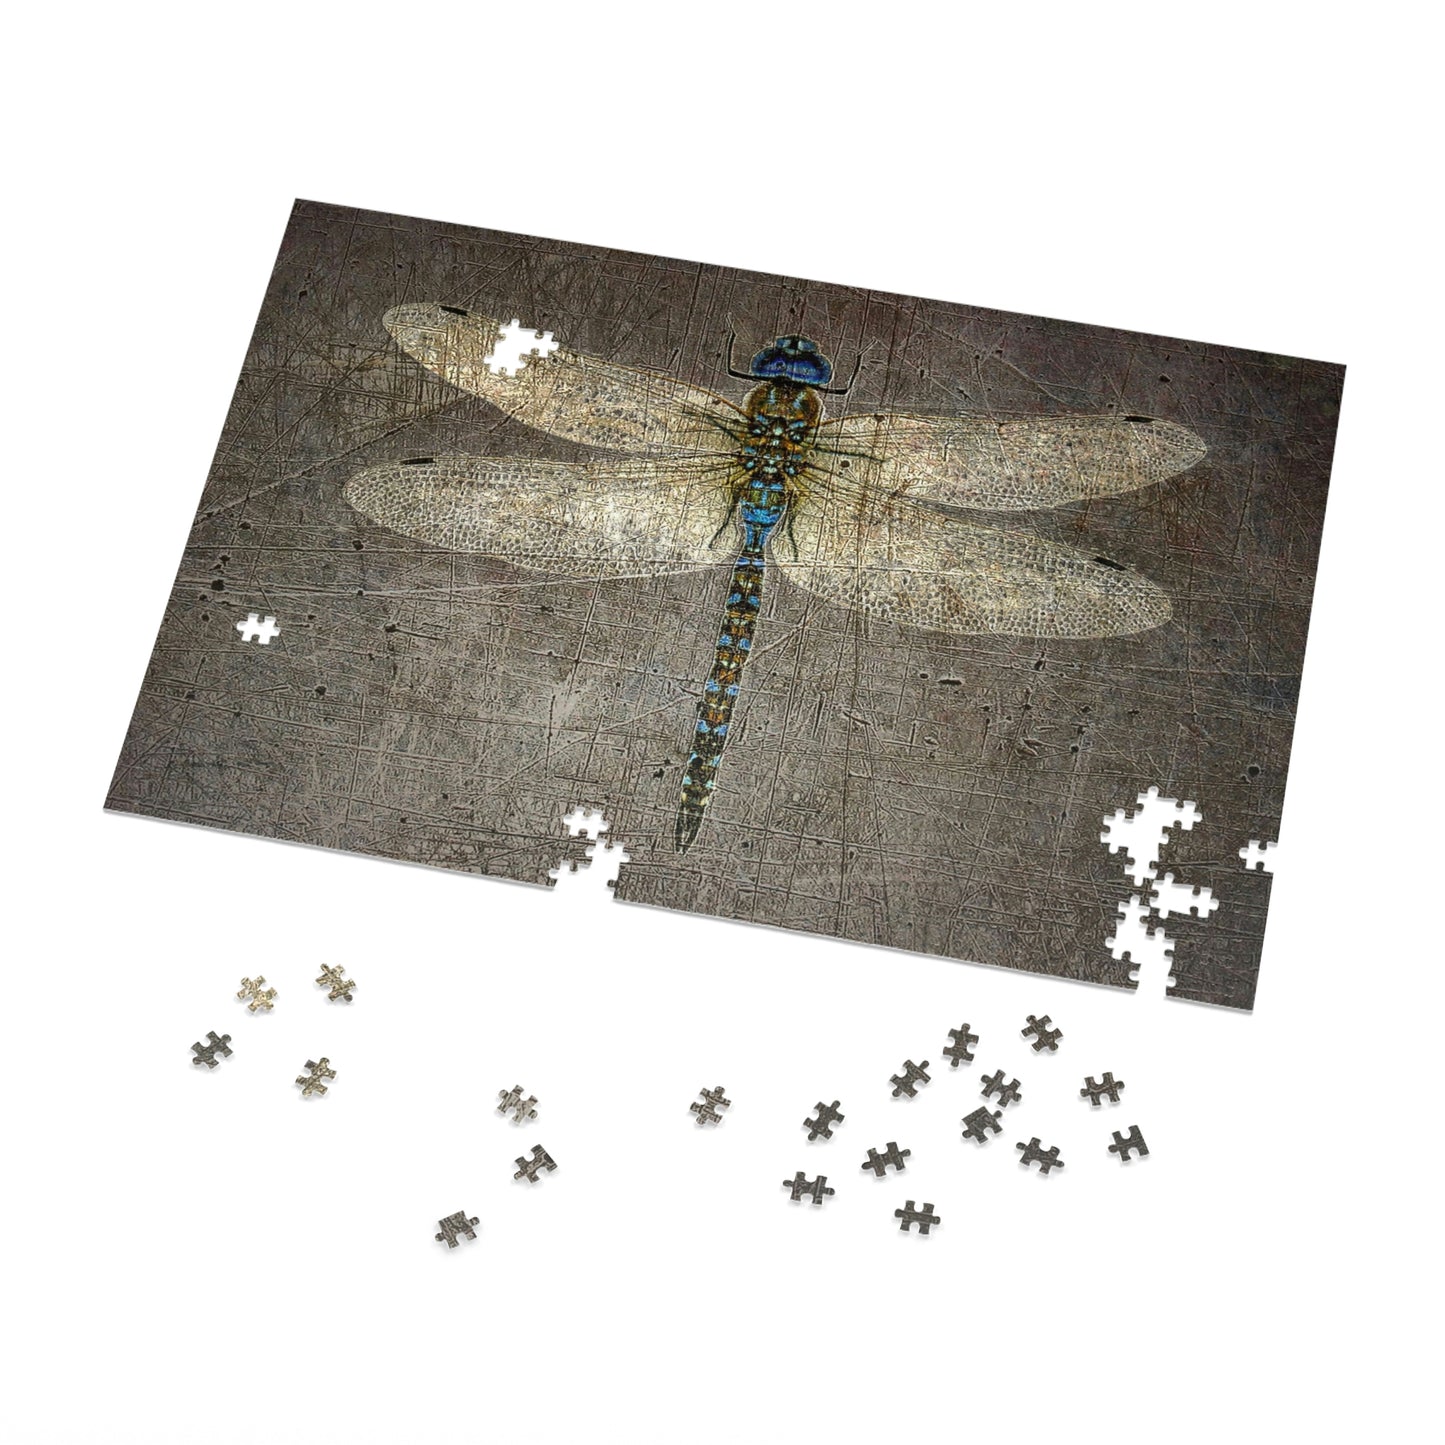 Dragonfly on Distressed Granite Background Puzzle 1000 pieces in progess